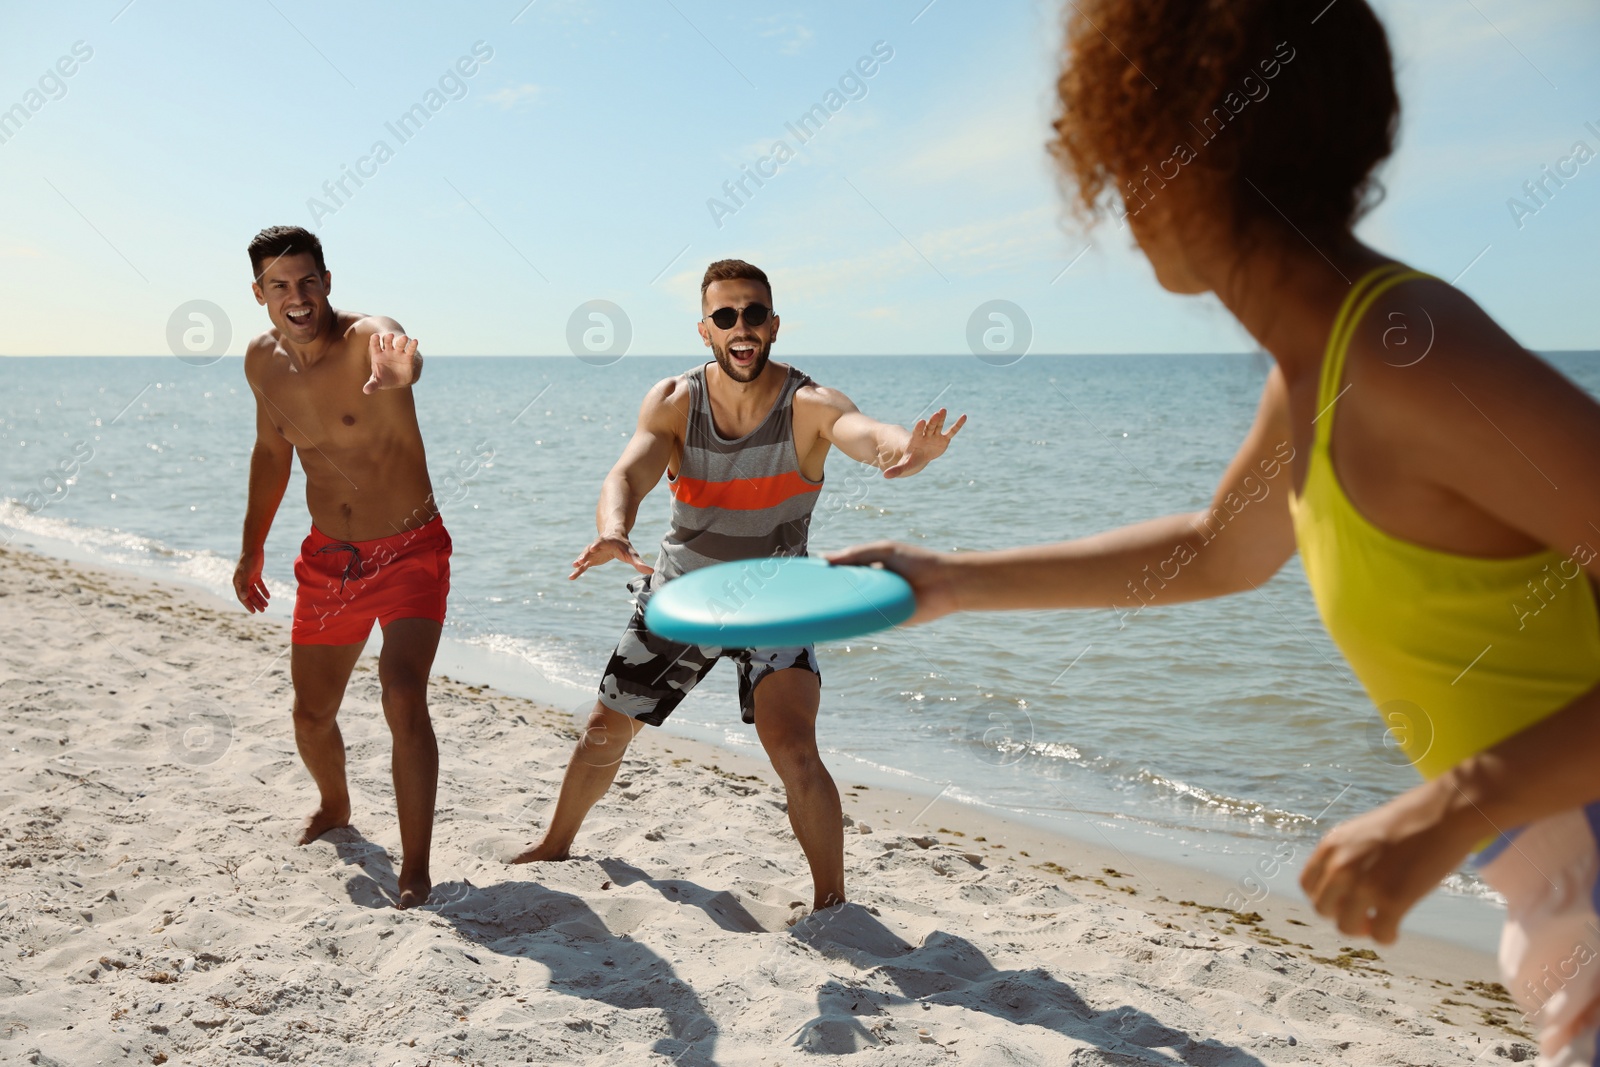 Photo of Friends playing with flying disk at beach on sunny day